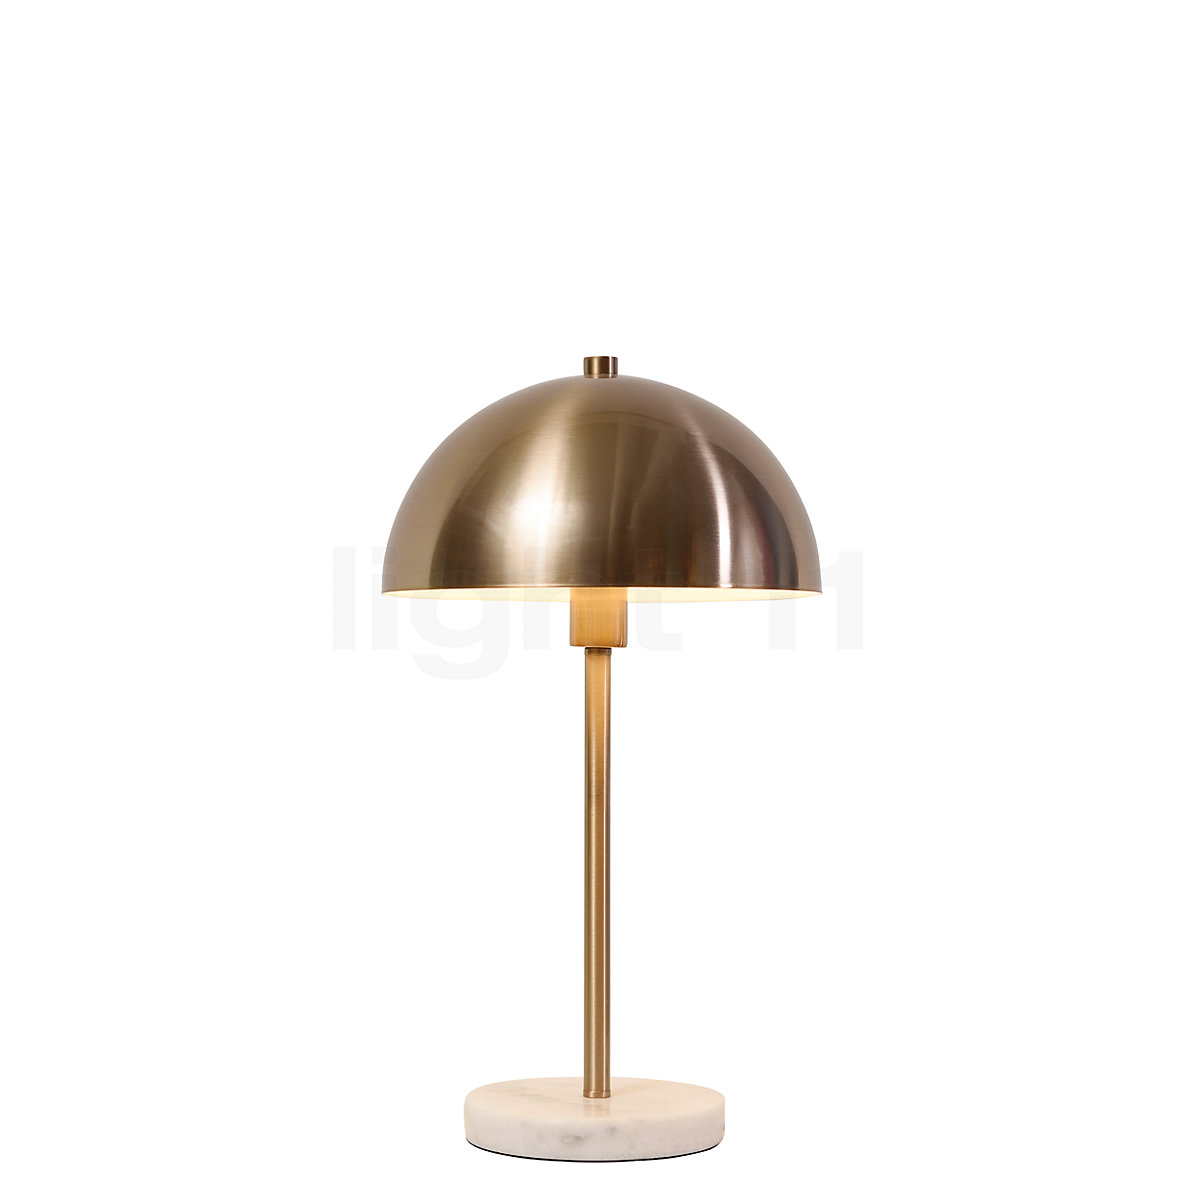 verlamming bijgeloof mezelf Buy It's about RoMi Toulouse Table Lamp at light11.eu